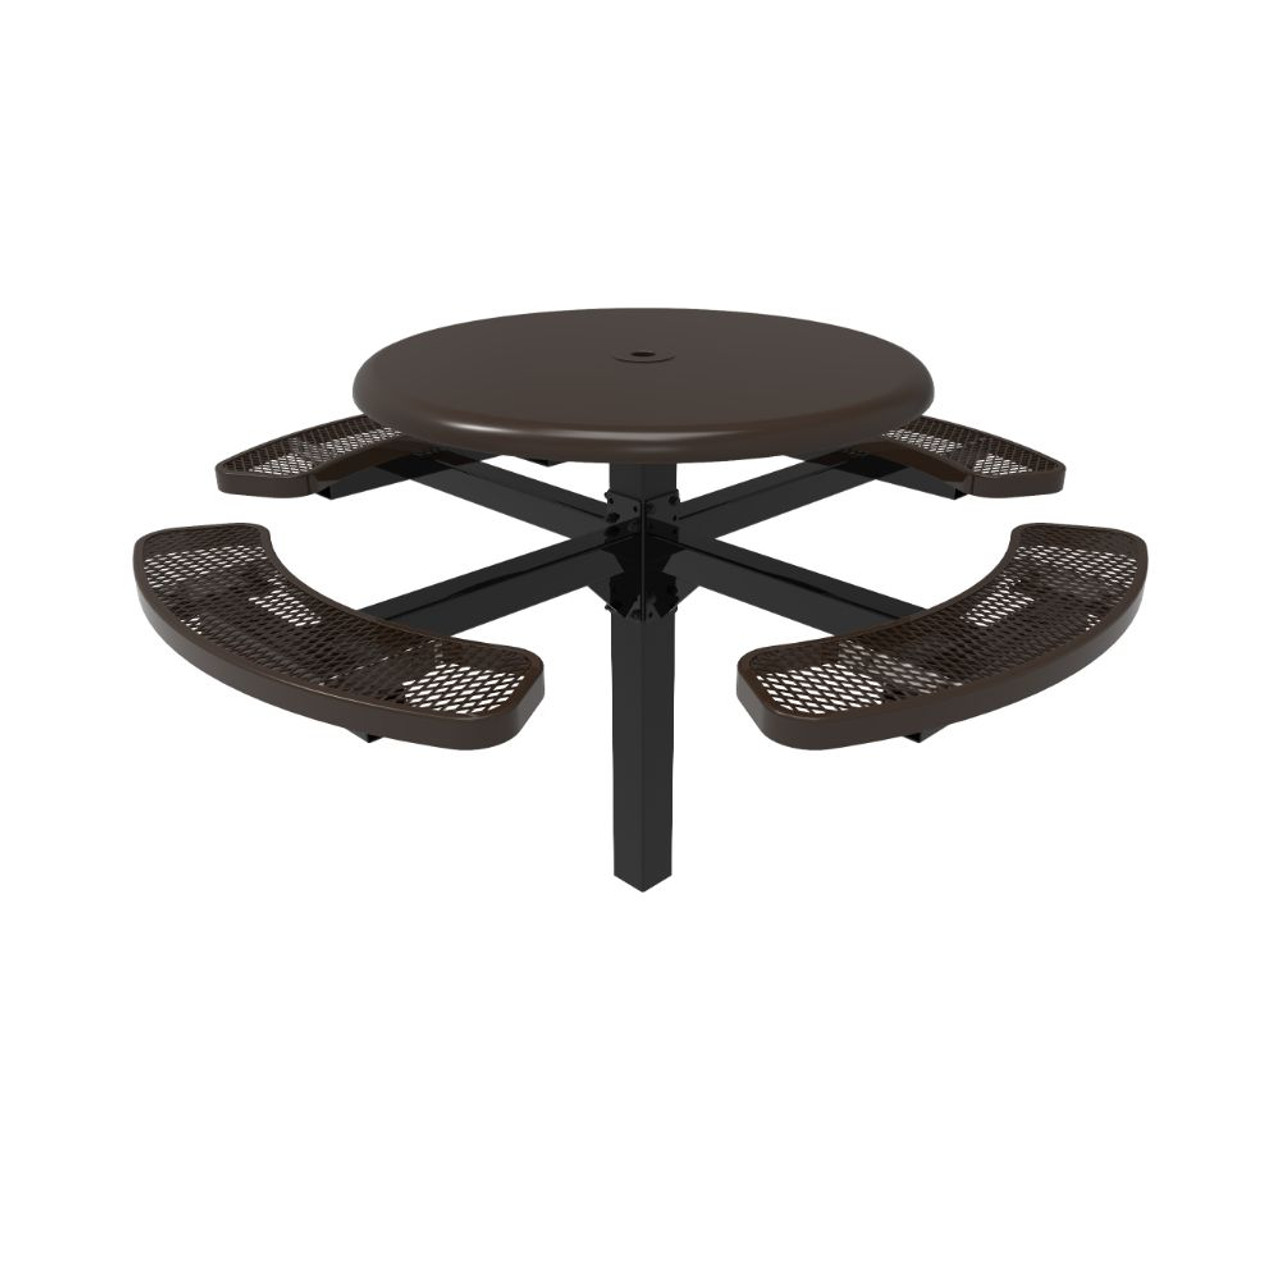 46" Round Solid Top Pedestal Table with Four Expanded Metal Seats - in-ground mount